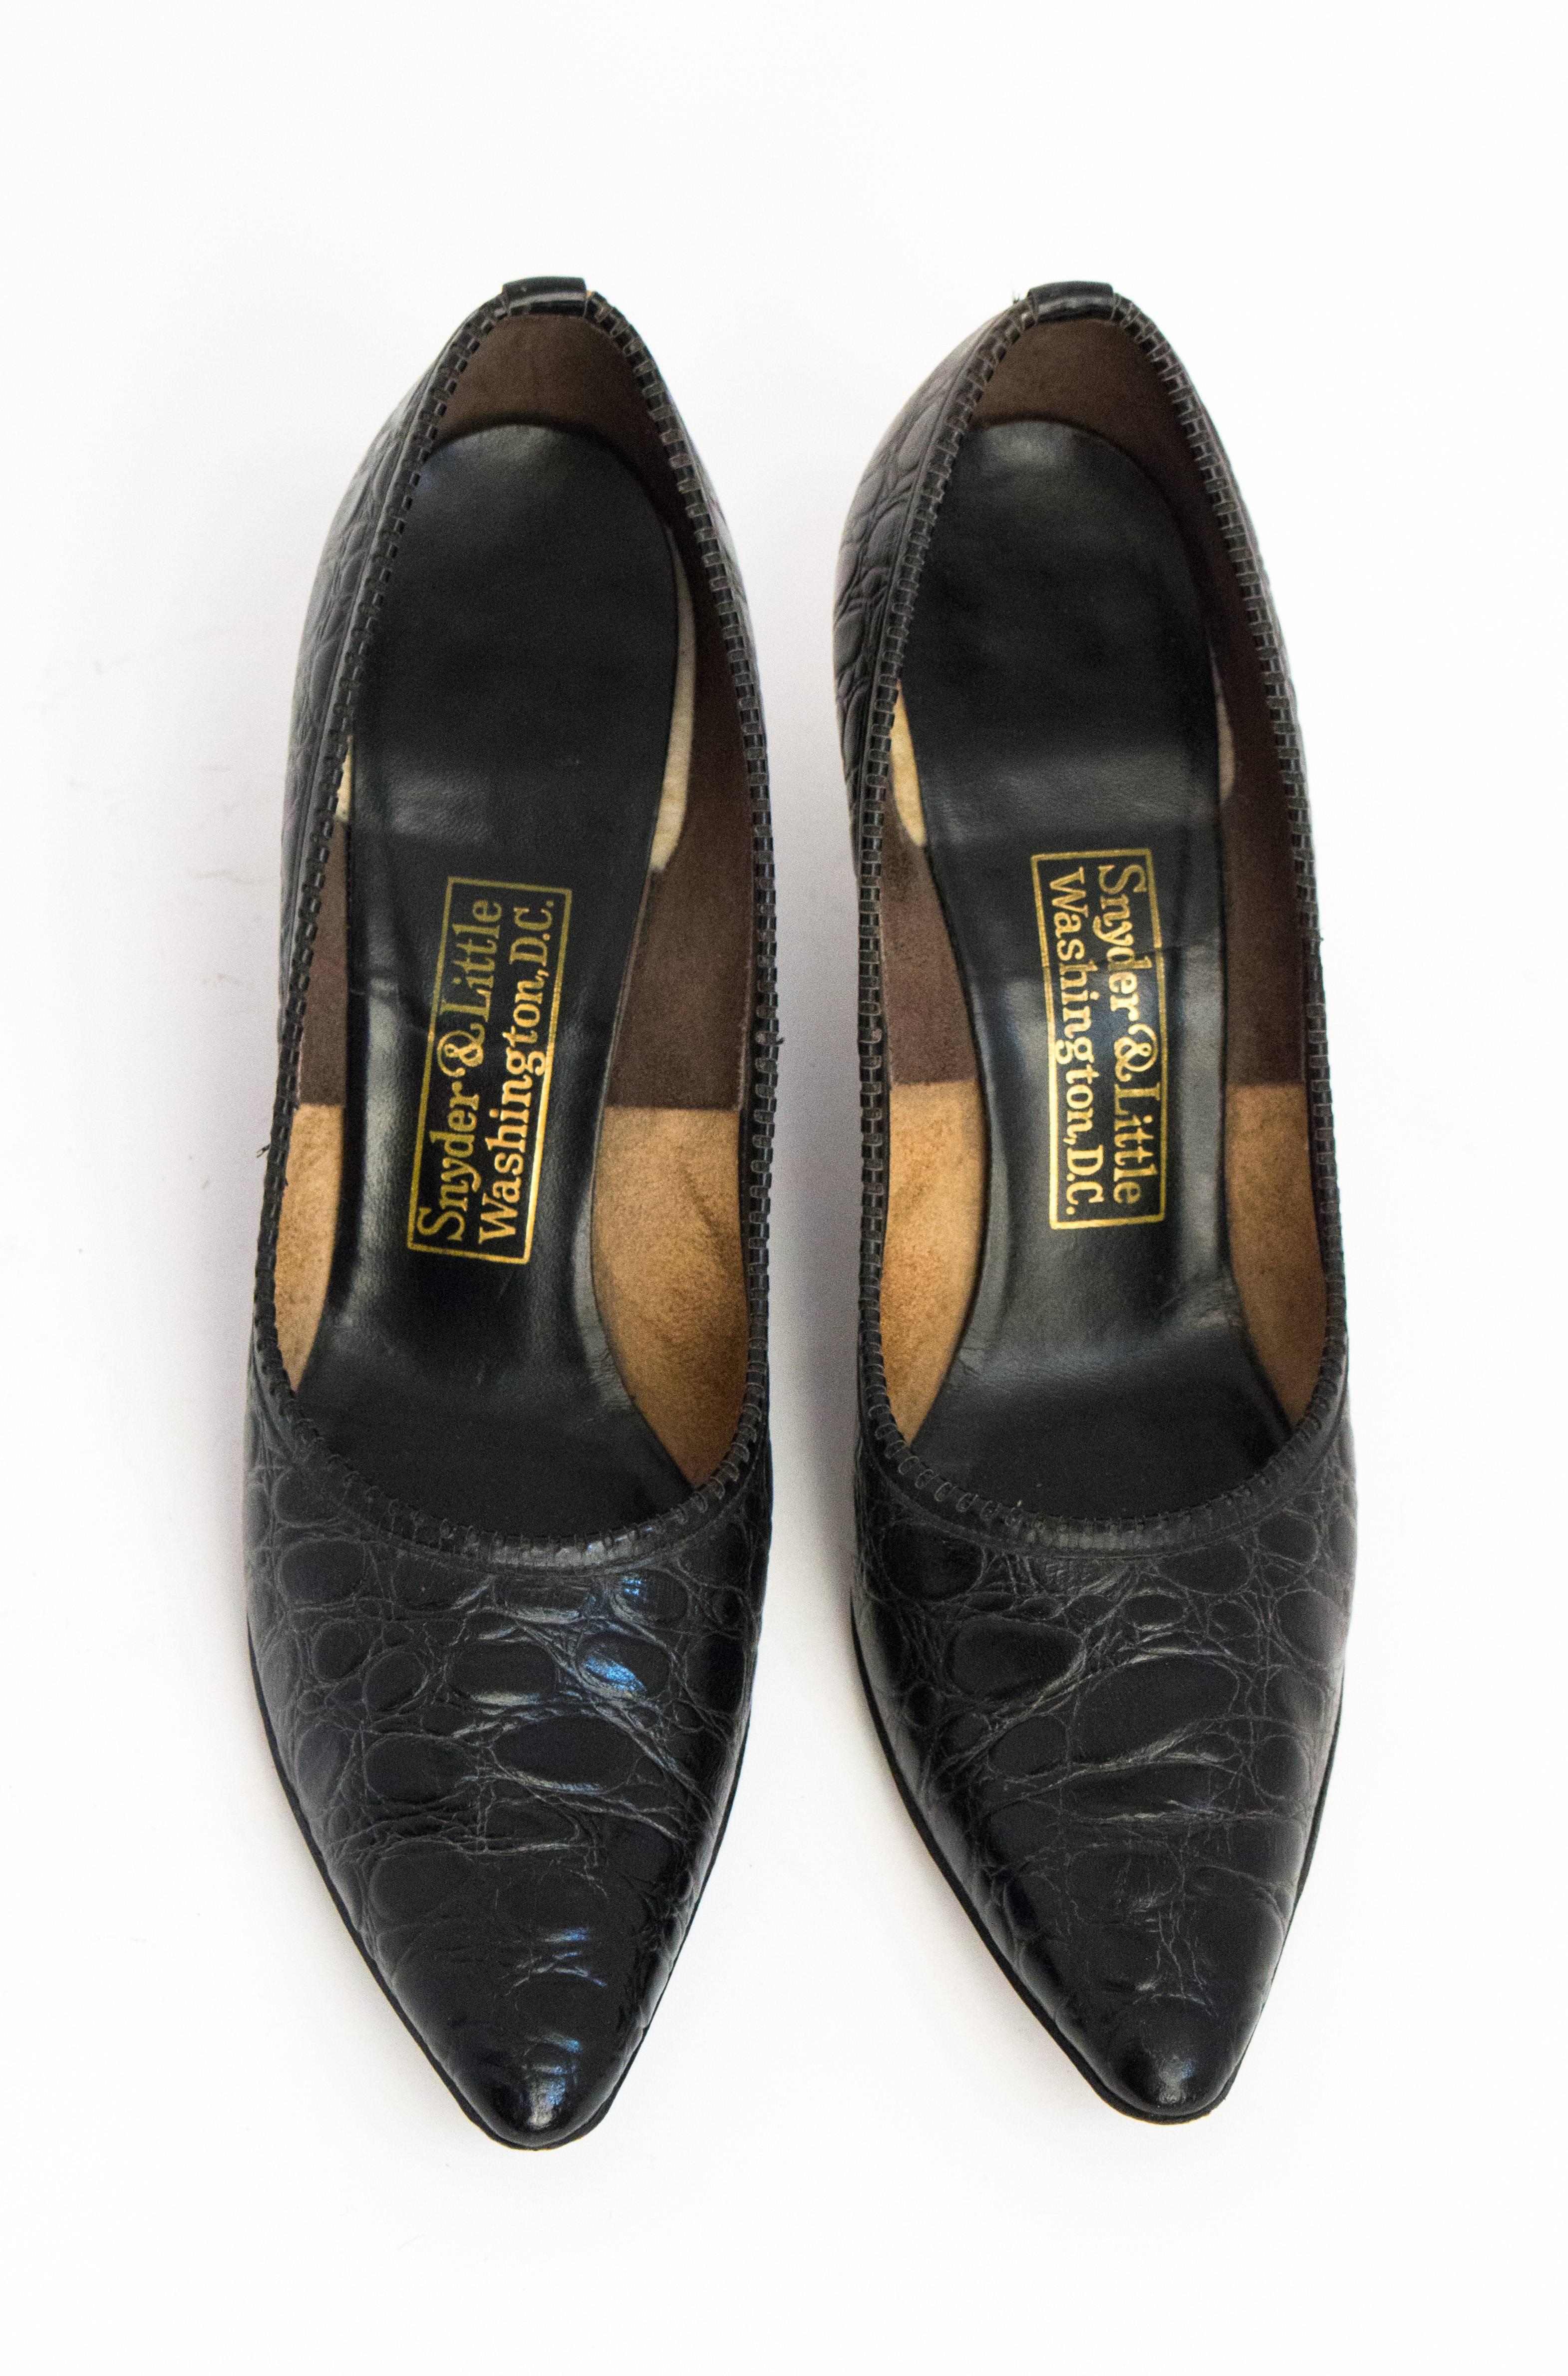 1960s pressed leather heels. Faux alligator. Leather sole. US size 8.

Palm of foot: 2 3/4